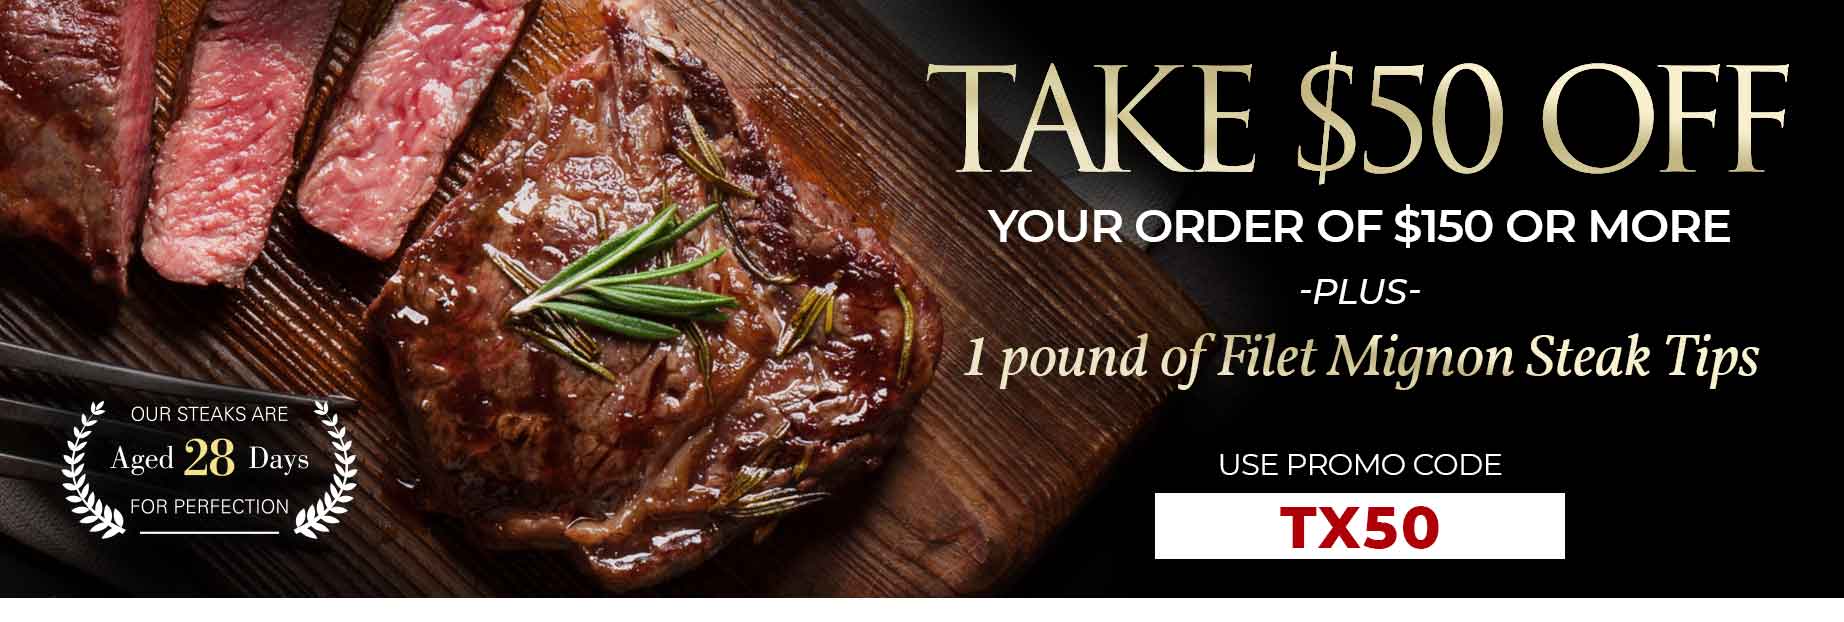 Limited Time Offer - $50 Off Plus FREE 1LB of Filet Mignon Steak Tips on Orders $150+ use Promo code: TX50